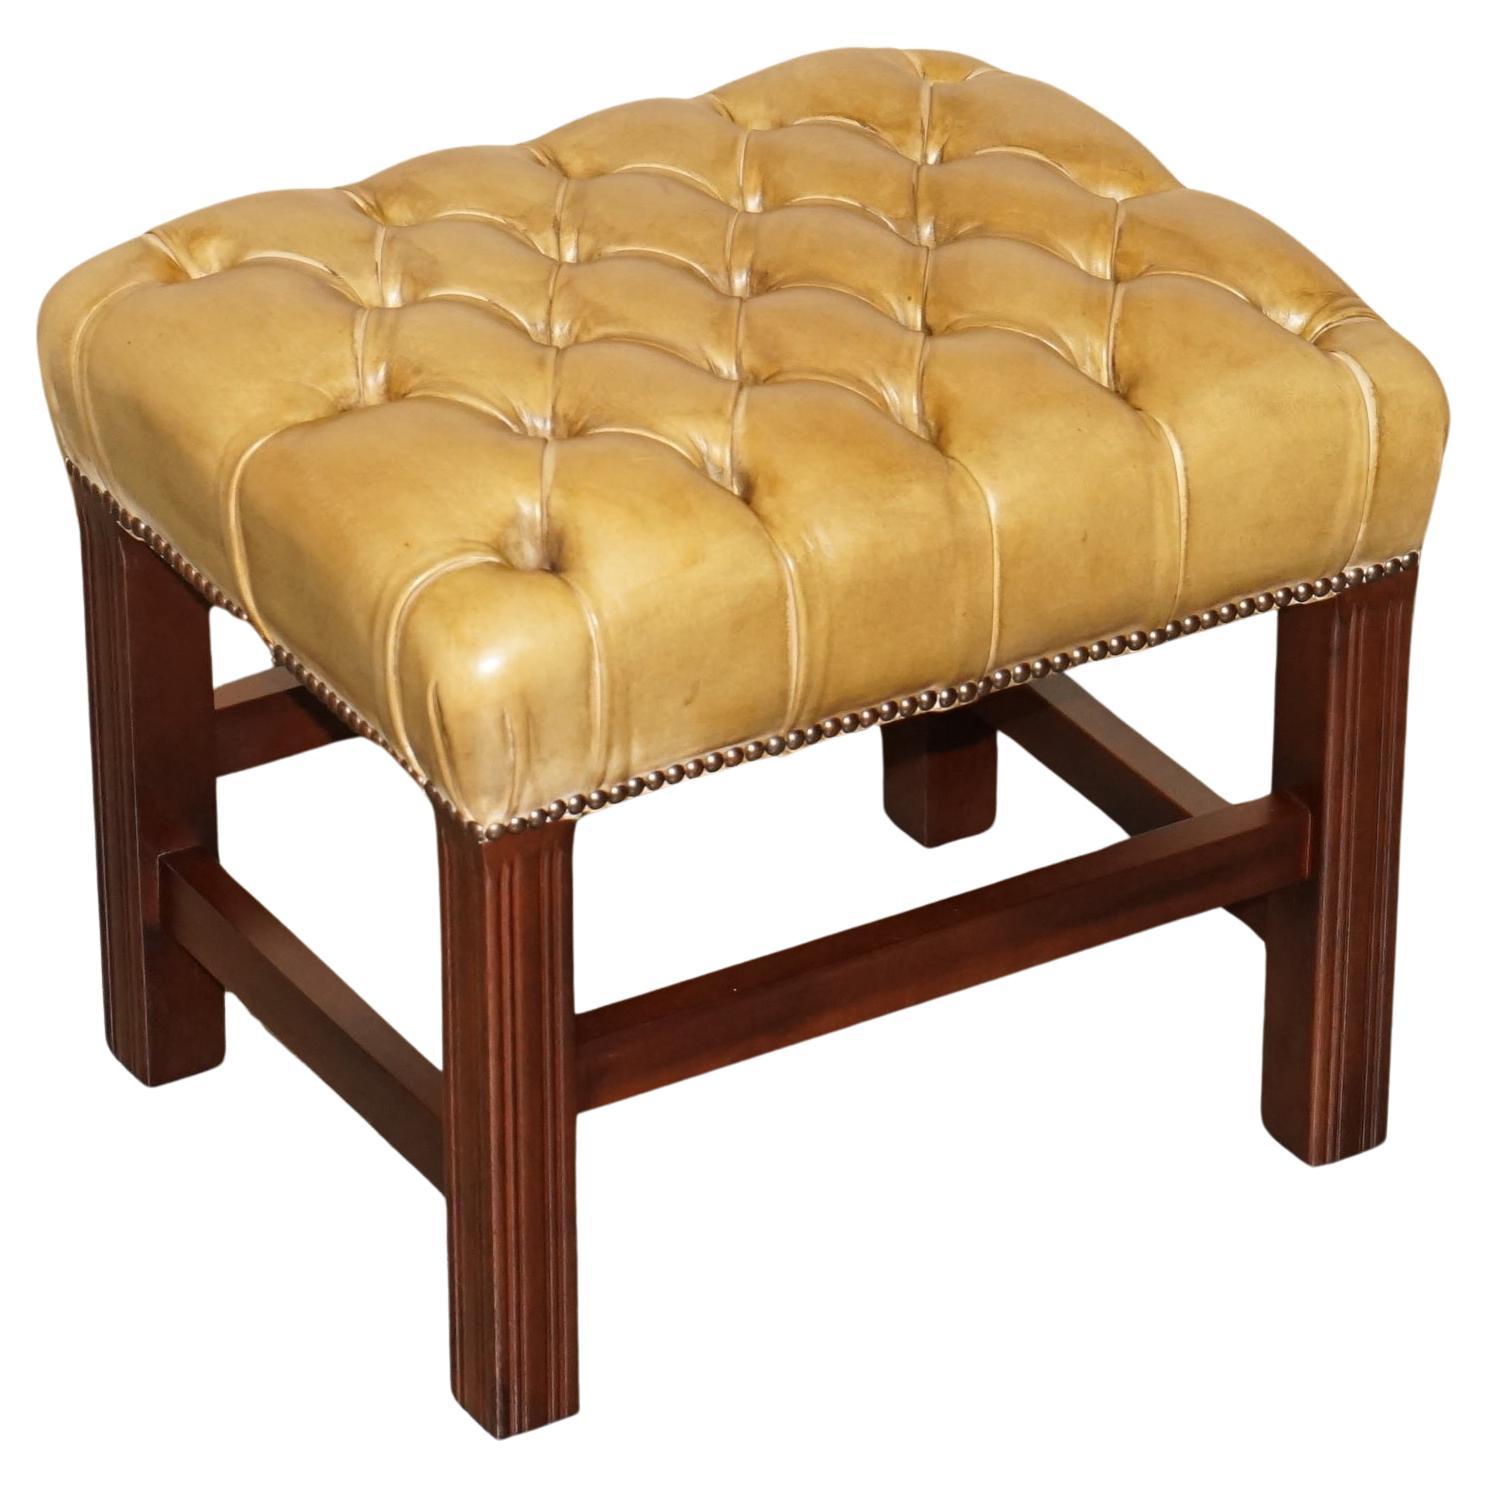 VINTAGE TAN BROWN LEATHER CHESTERFIELD TUFTED BARON FOOTSTOOL PART OF SUiTE For Sale